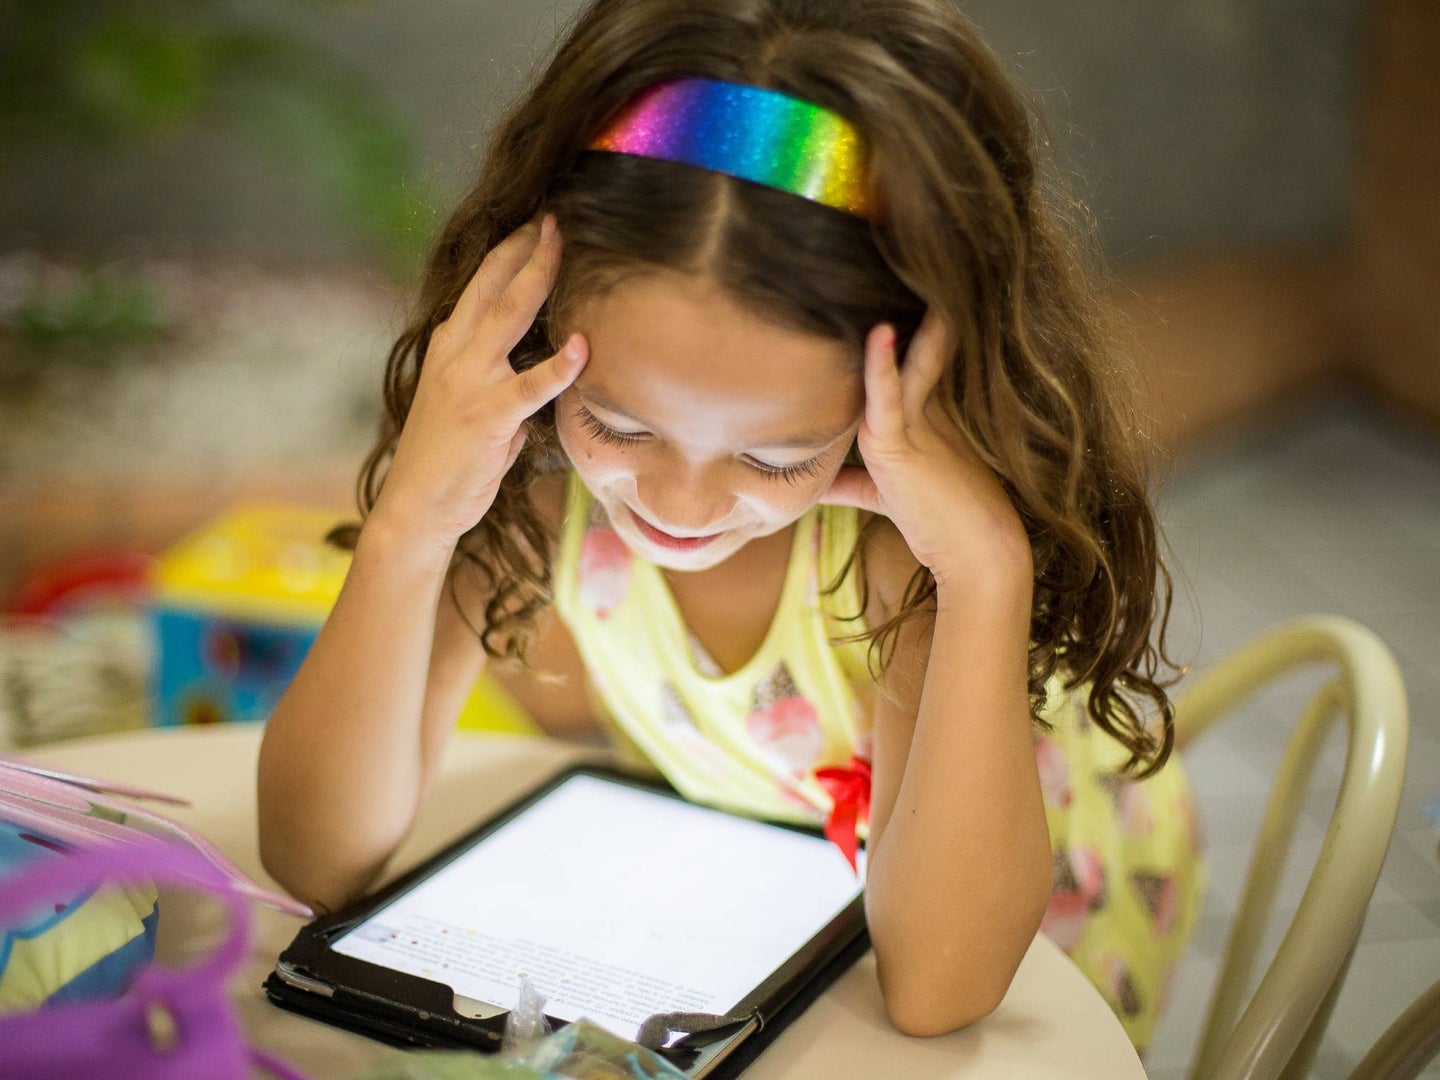 Young child sitting at a table looking at a tablet